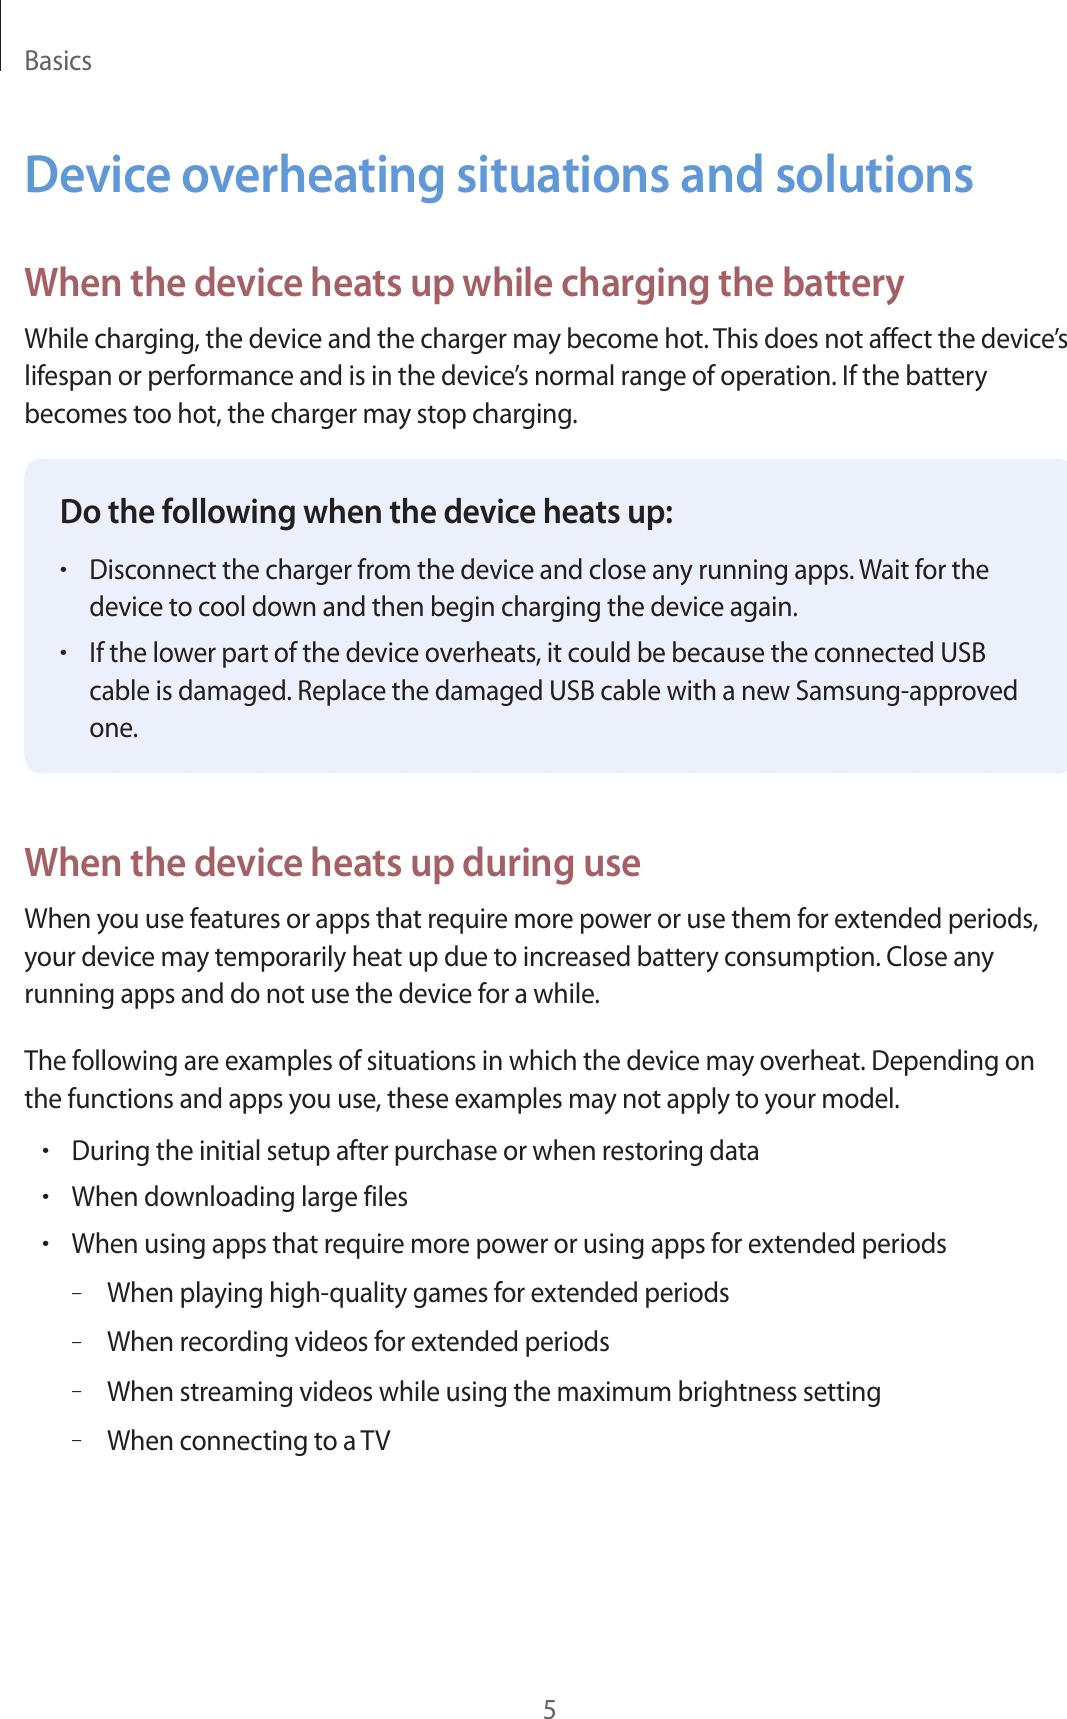 Basics5Device overheating situations and solutionsWhen the device heats up while charging the batteryWhile charging, the device and the charger may become hot. This does not affect the device’s lifespan or performance and is in the device’s normal range of operation. If the battery becomes too hot, the charger may stop charging.Do the following when the device heats up:•Disconnect the charger from the device and close any running apps. Wait for the device to cool down and then begin charging the device again.•If the lower part of the device overheats, it could be because the connected USB cable is damaged. Replace the damaged USB cable with a new Samsung-approved one.When the device heats up during useWhen you use features or apps that require more power or use them for extended periods, your device may temporarily heat up due to increased battery consumption. Close any running apps and do not use the device for a while.The following are examples of situations in which the device may overheat. Depending on the functions and apps you use, these examples may not apply to your model.•During the initial setup after purchase or when restoring data•When downloading large files•When using apps that require more power or using apps for extended periods–When playing high-quality games for extended periods–When recording videos for extended periods–When streaming videos while using the maximum brightness setting–When connecting to a TV